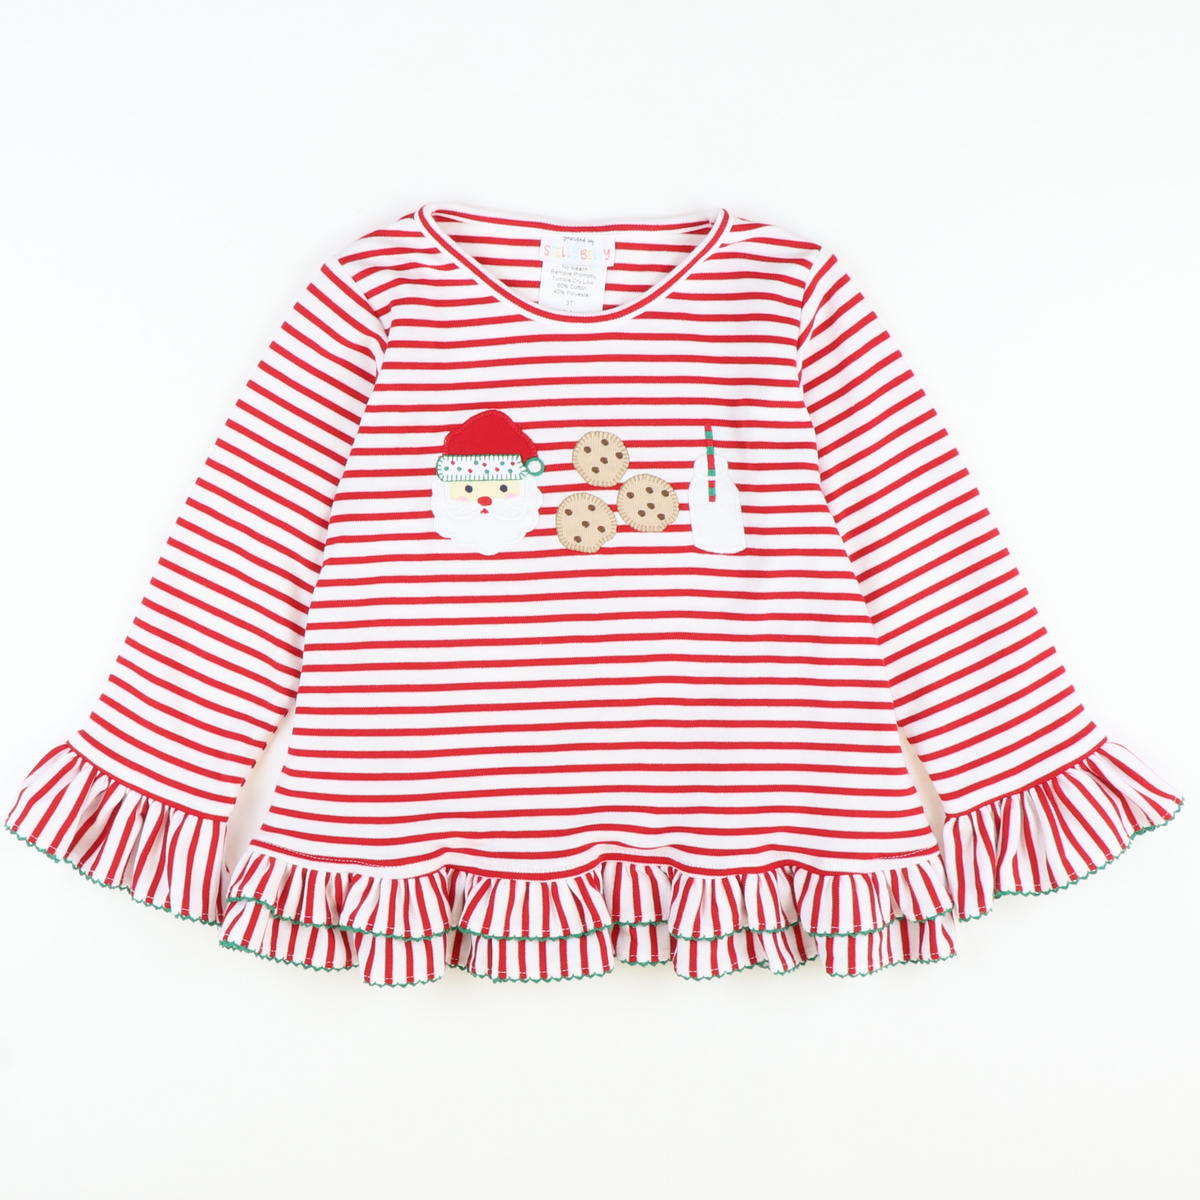 Appliquéd Christmas Eve Ruffle Top - Red Stripe Knit - Stellybelly